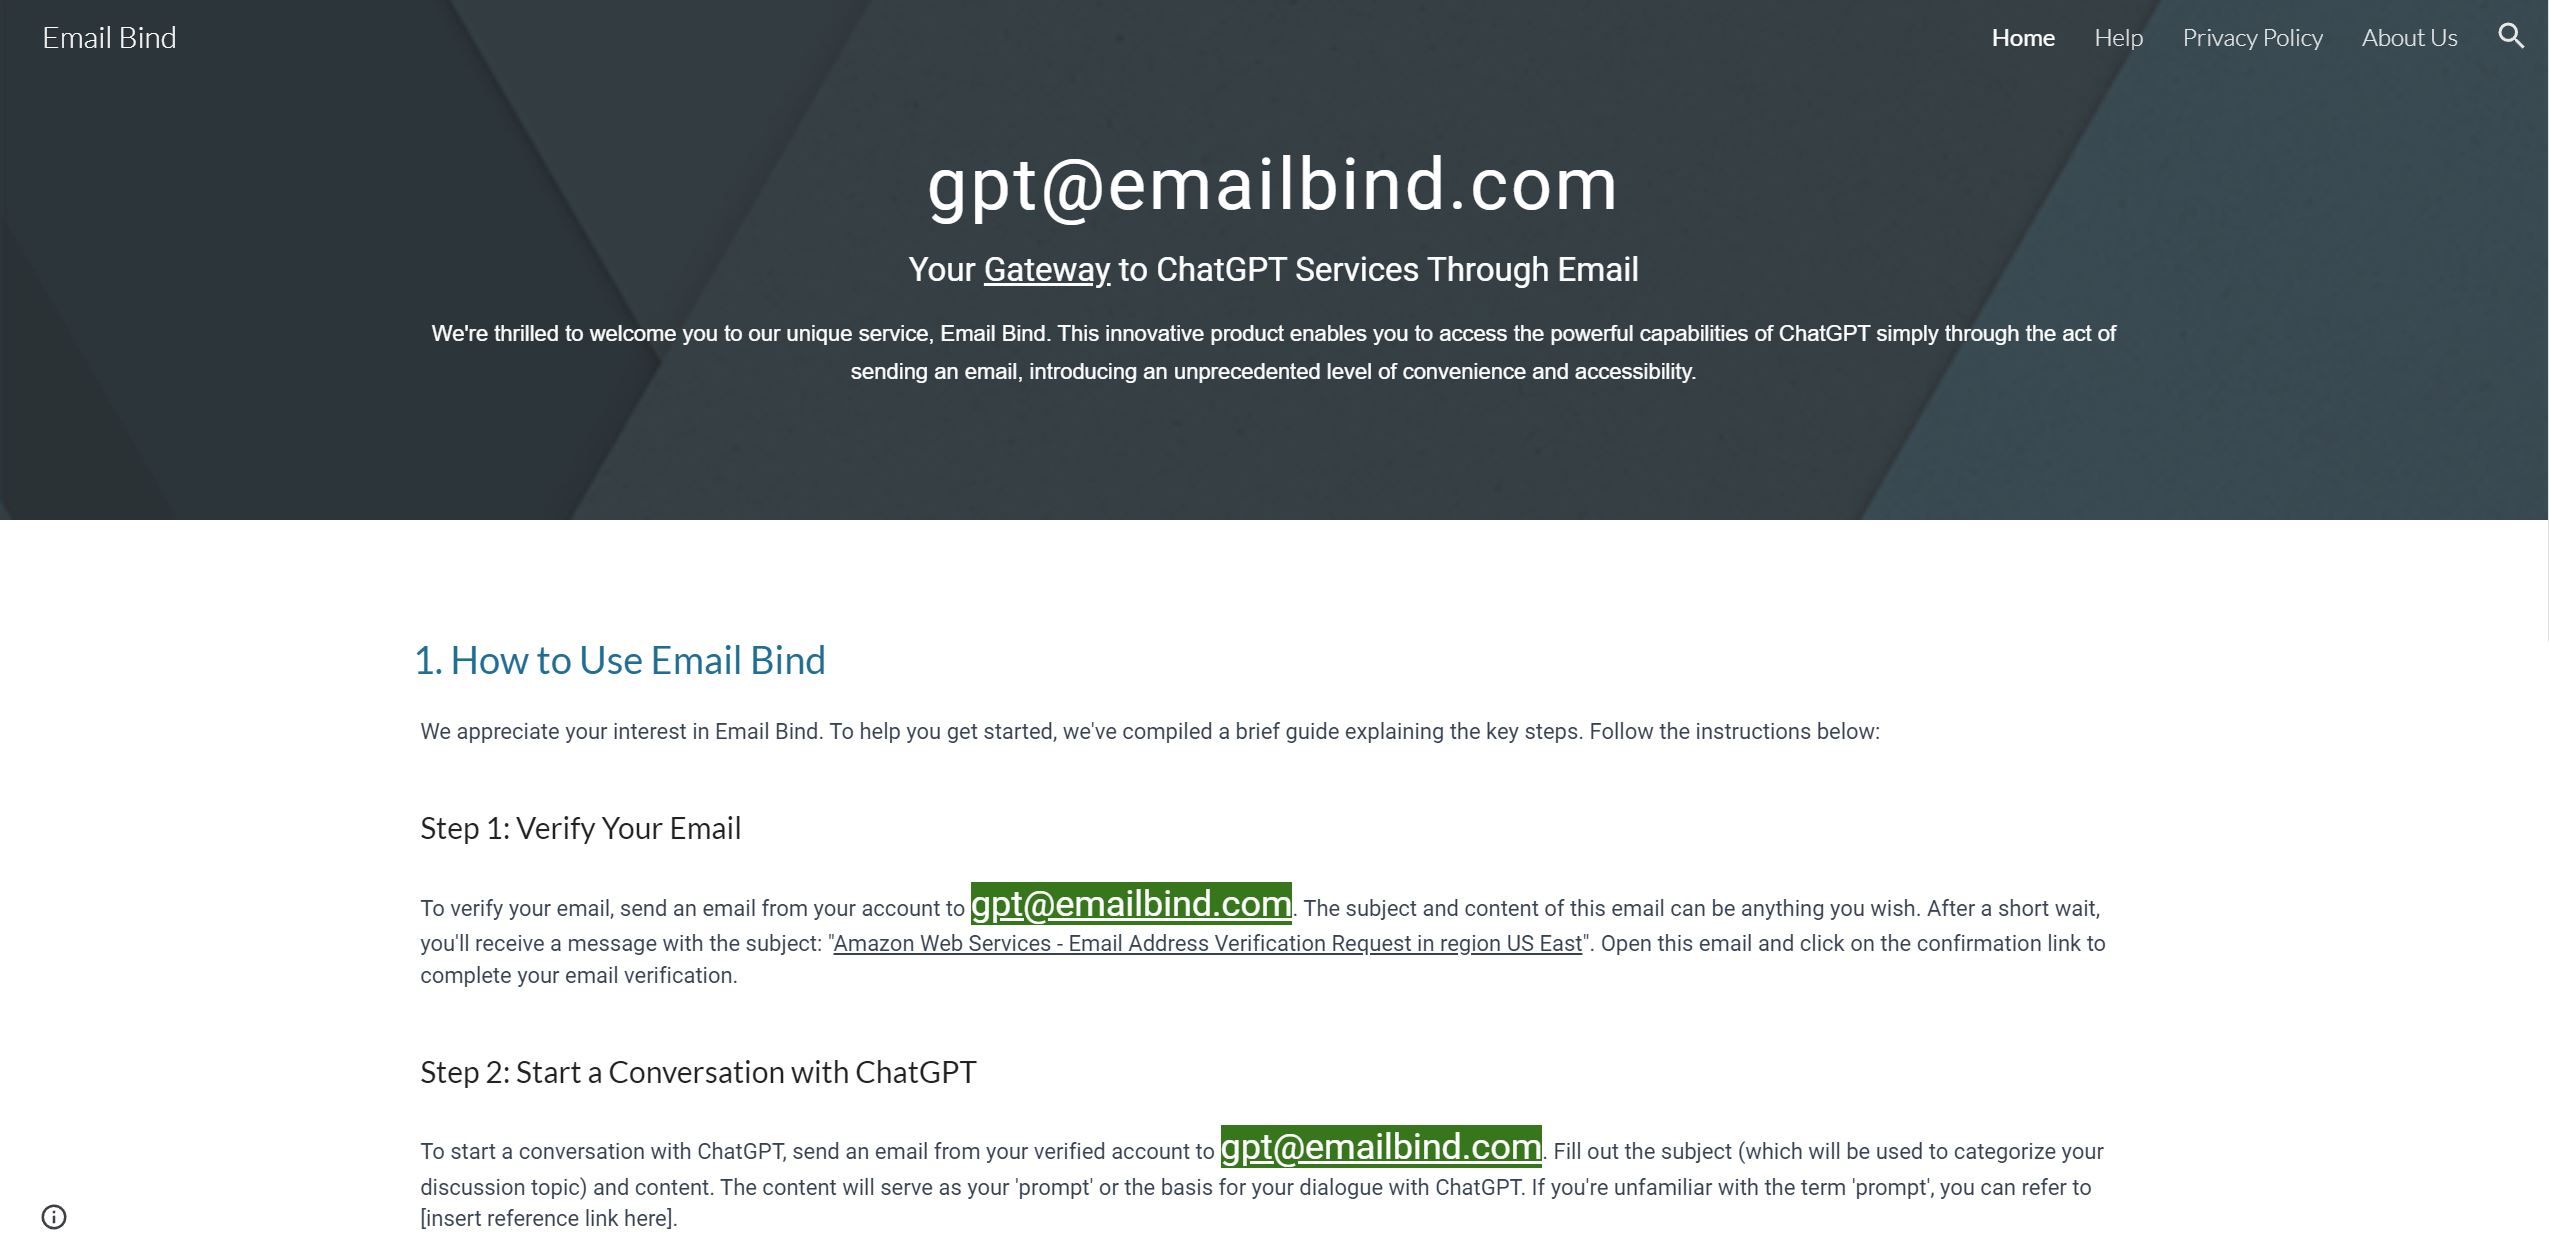 Email BindAI powered ChatGPT can now be accessed via email for